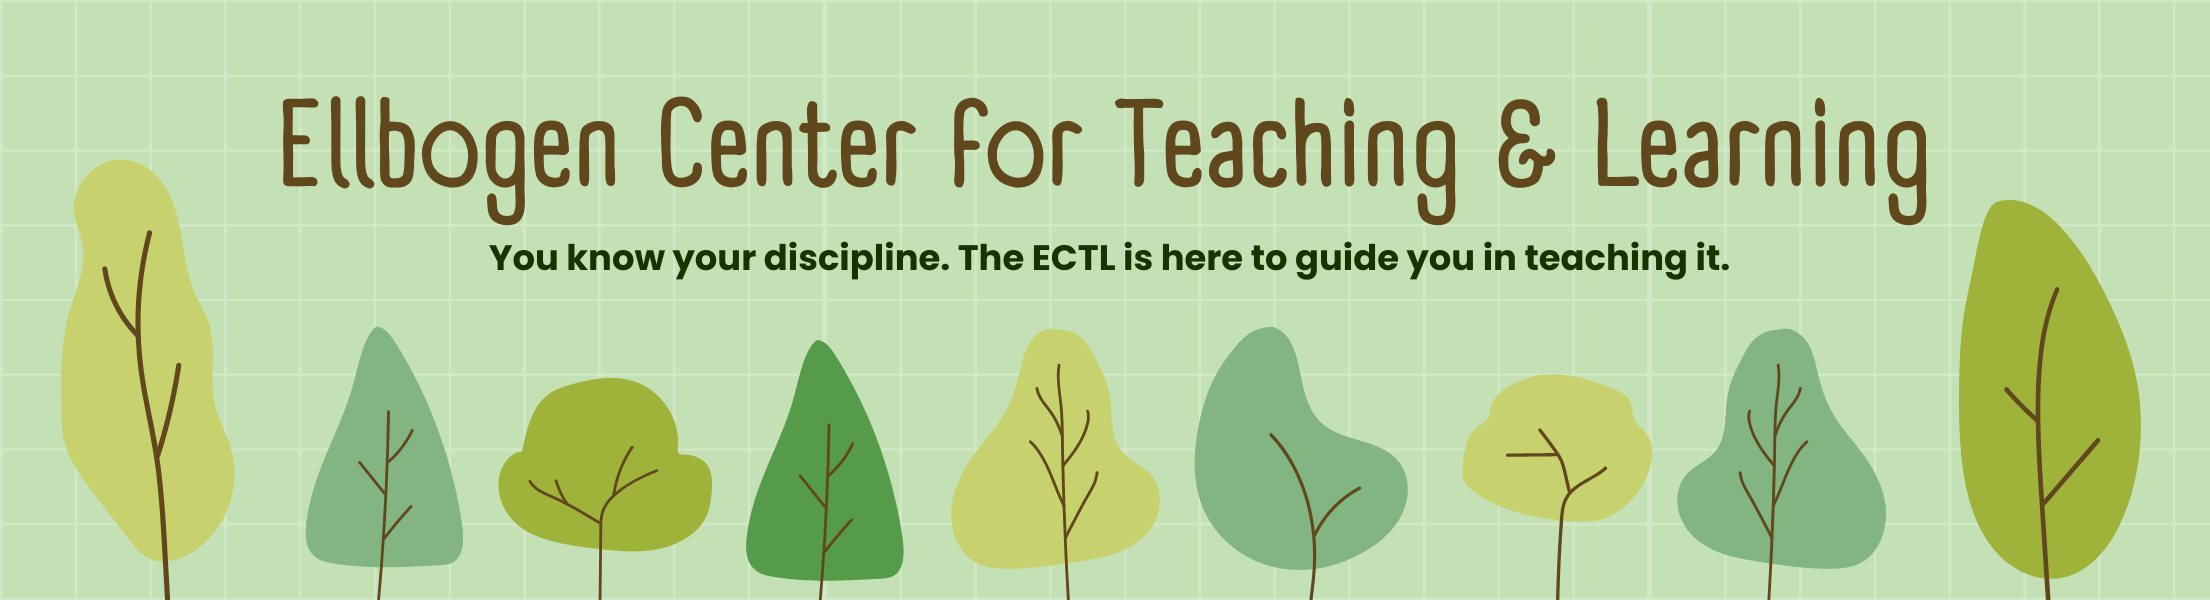 The Ellbogen Center for Teaching & Learning. You know your discipline. The ECTL is here to guide you in teaching it.